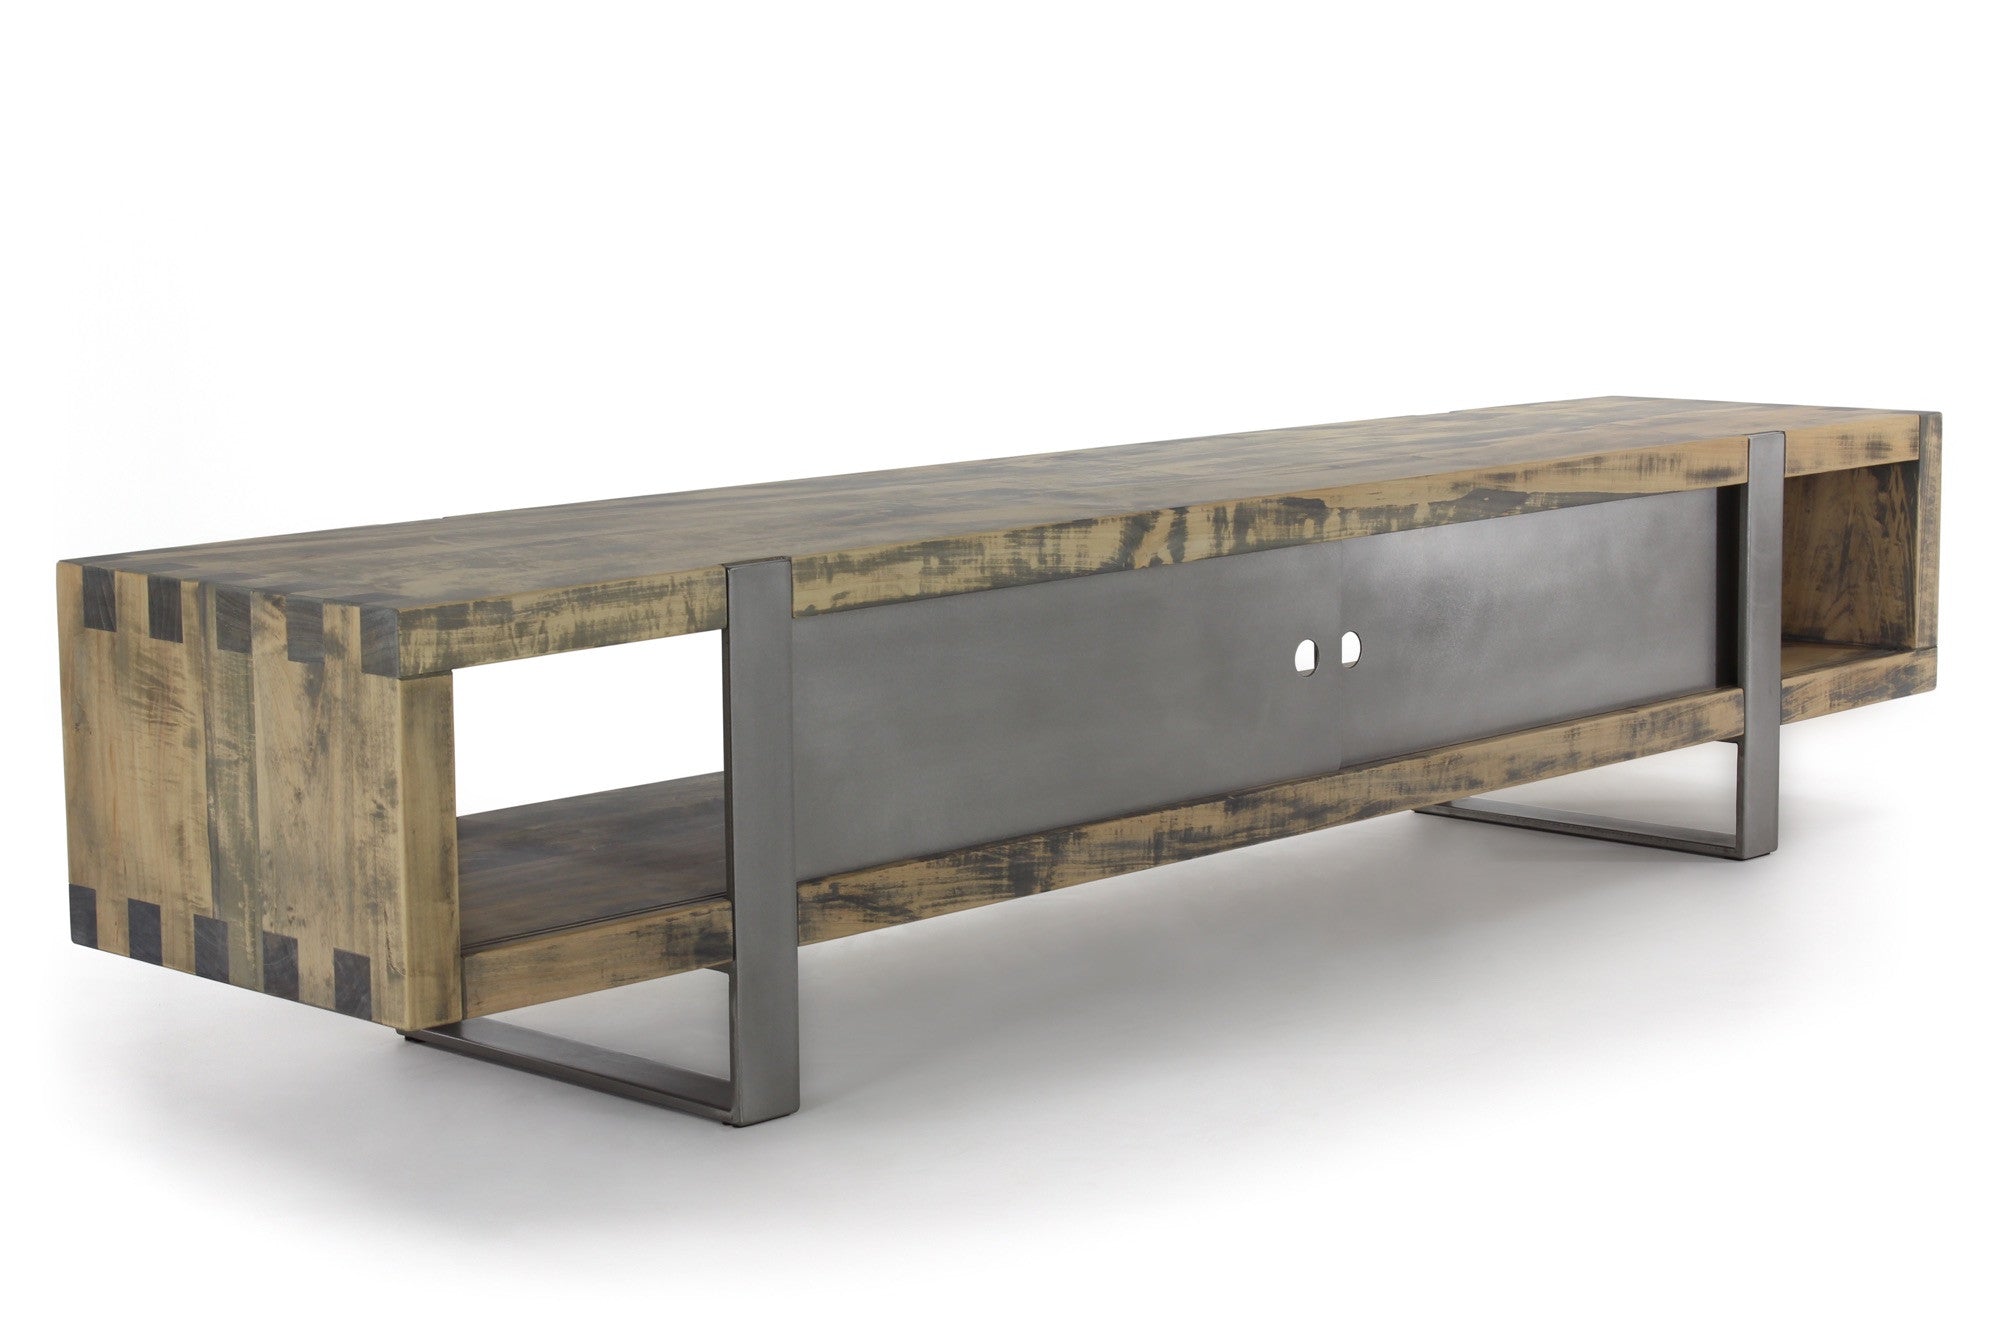 8' media console | worn maple wood finish with stainless steel